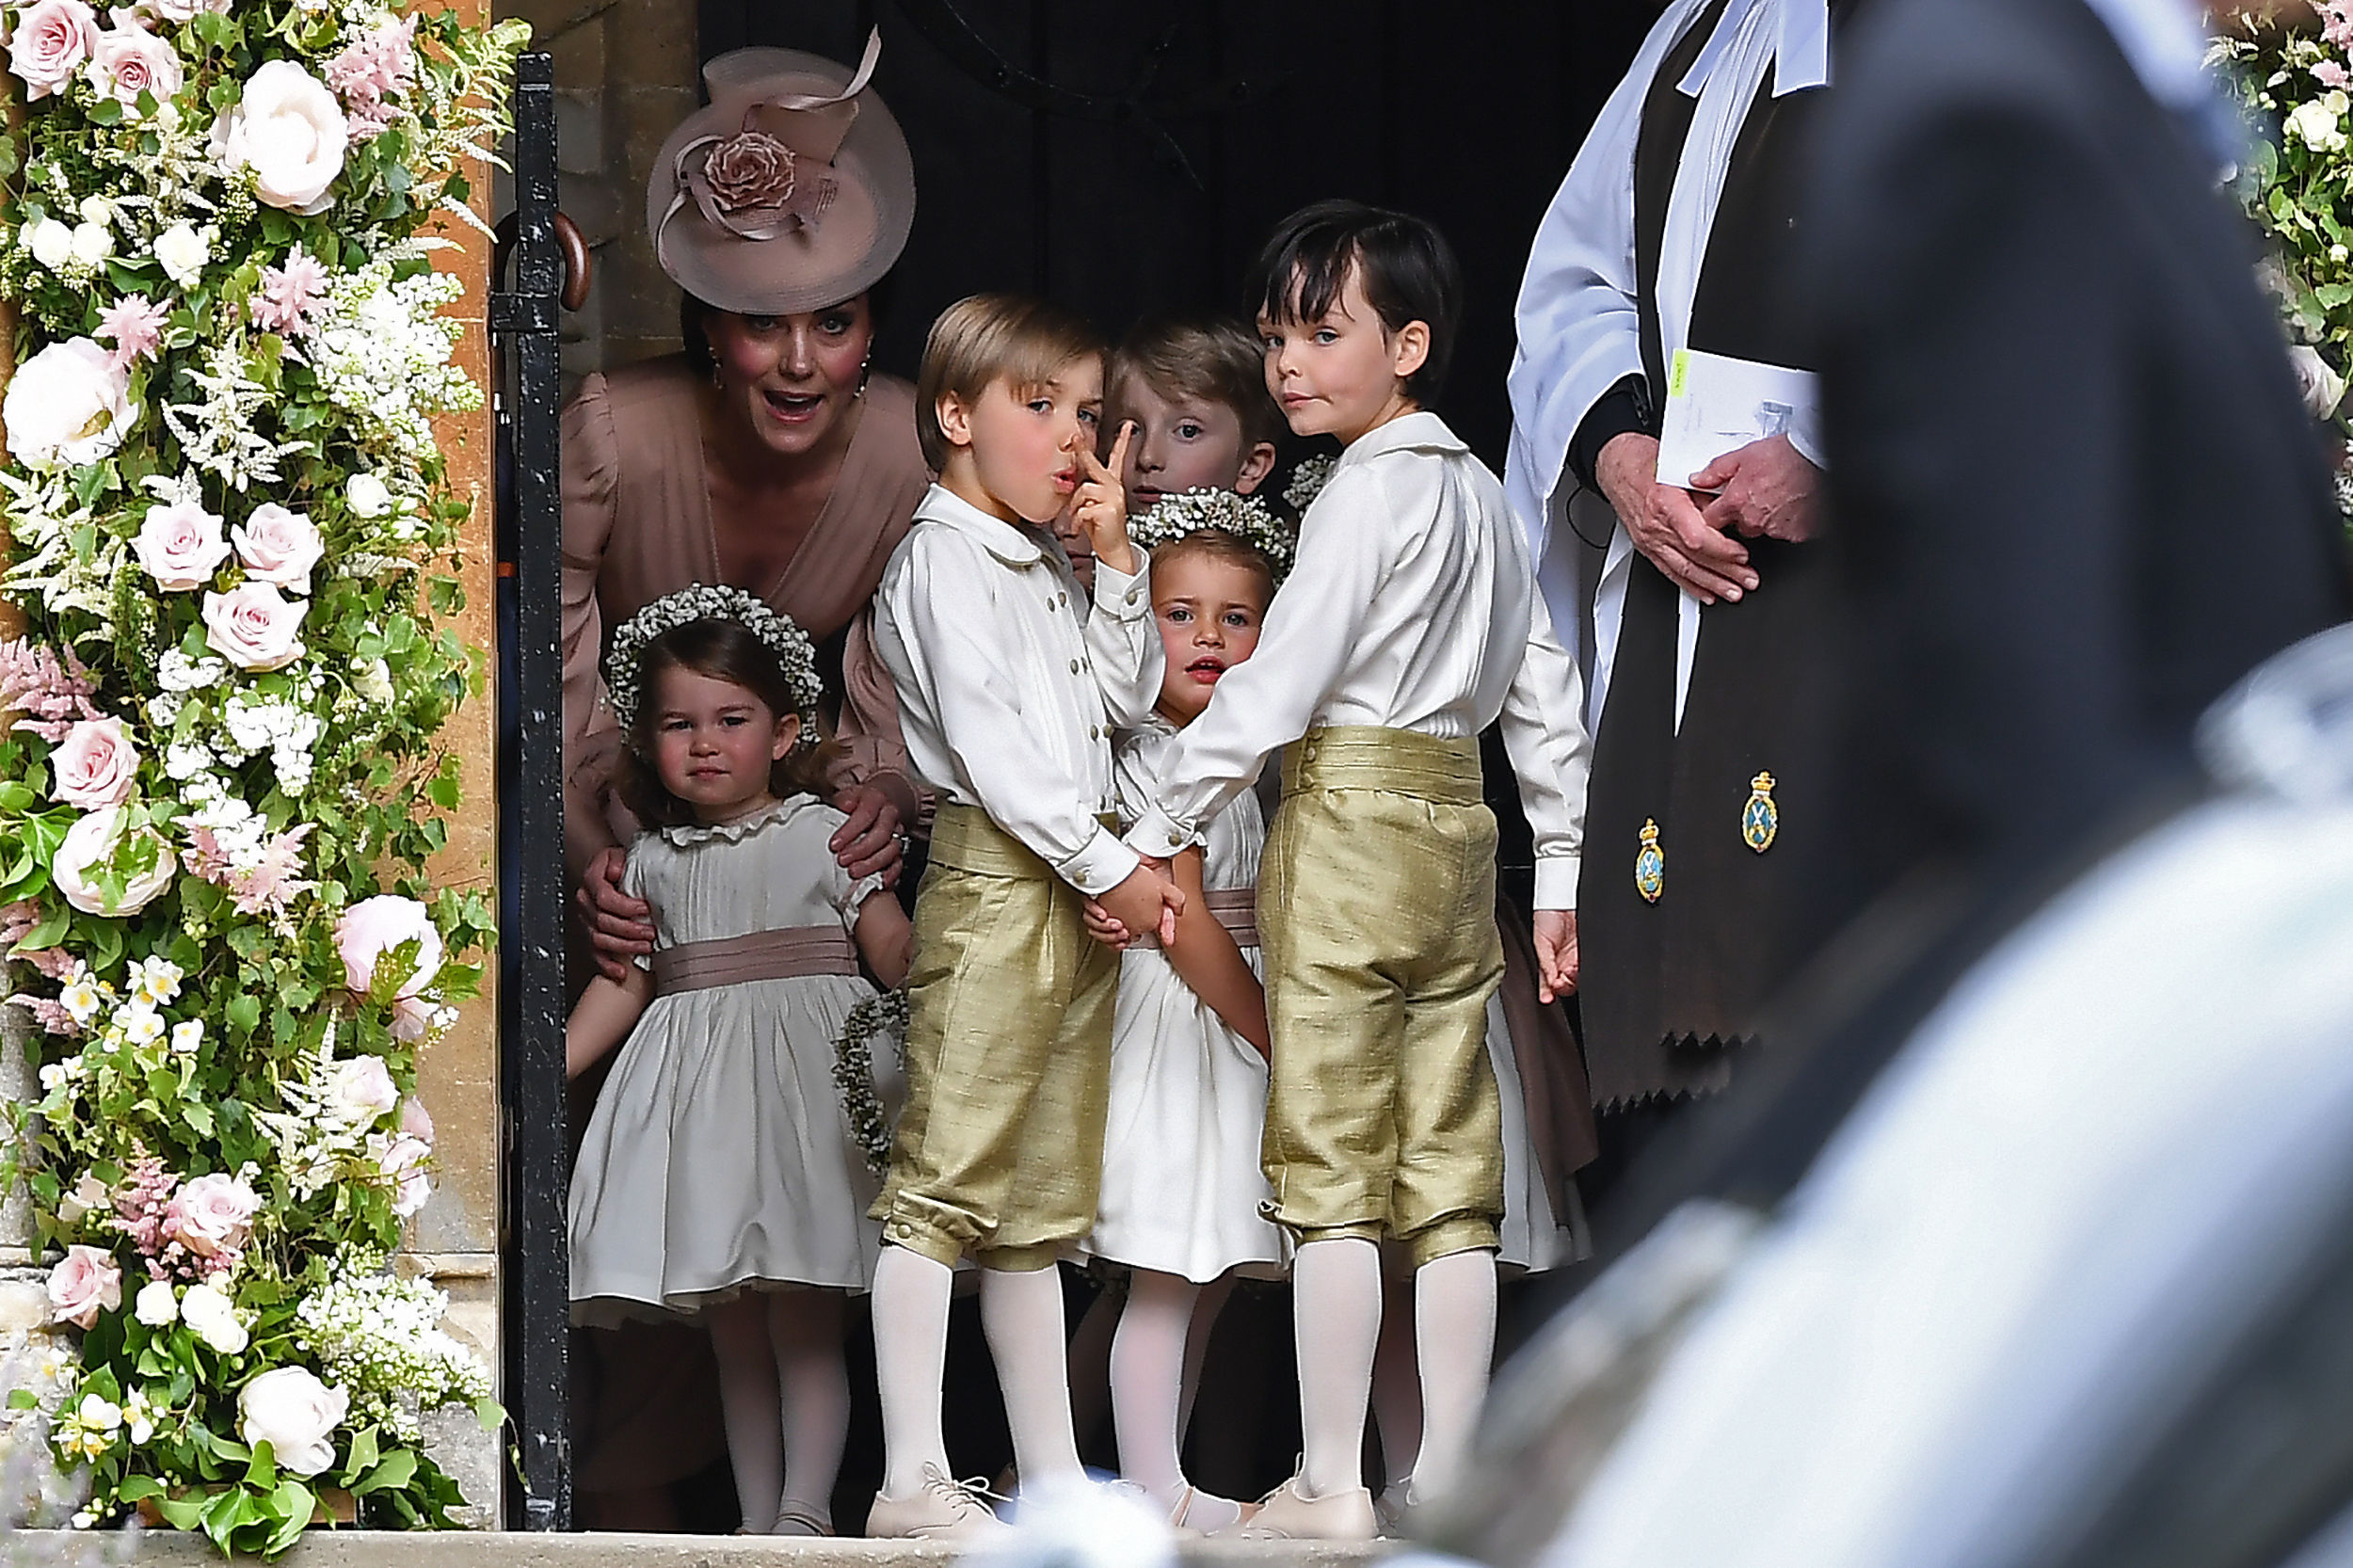 A pageboy at Pippa’s wedding appears to misbehave